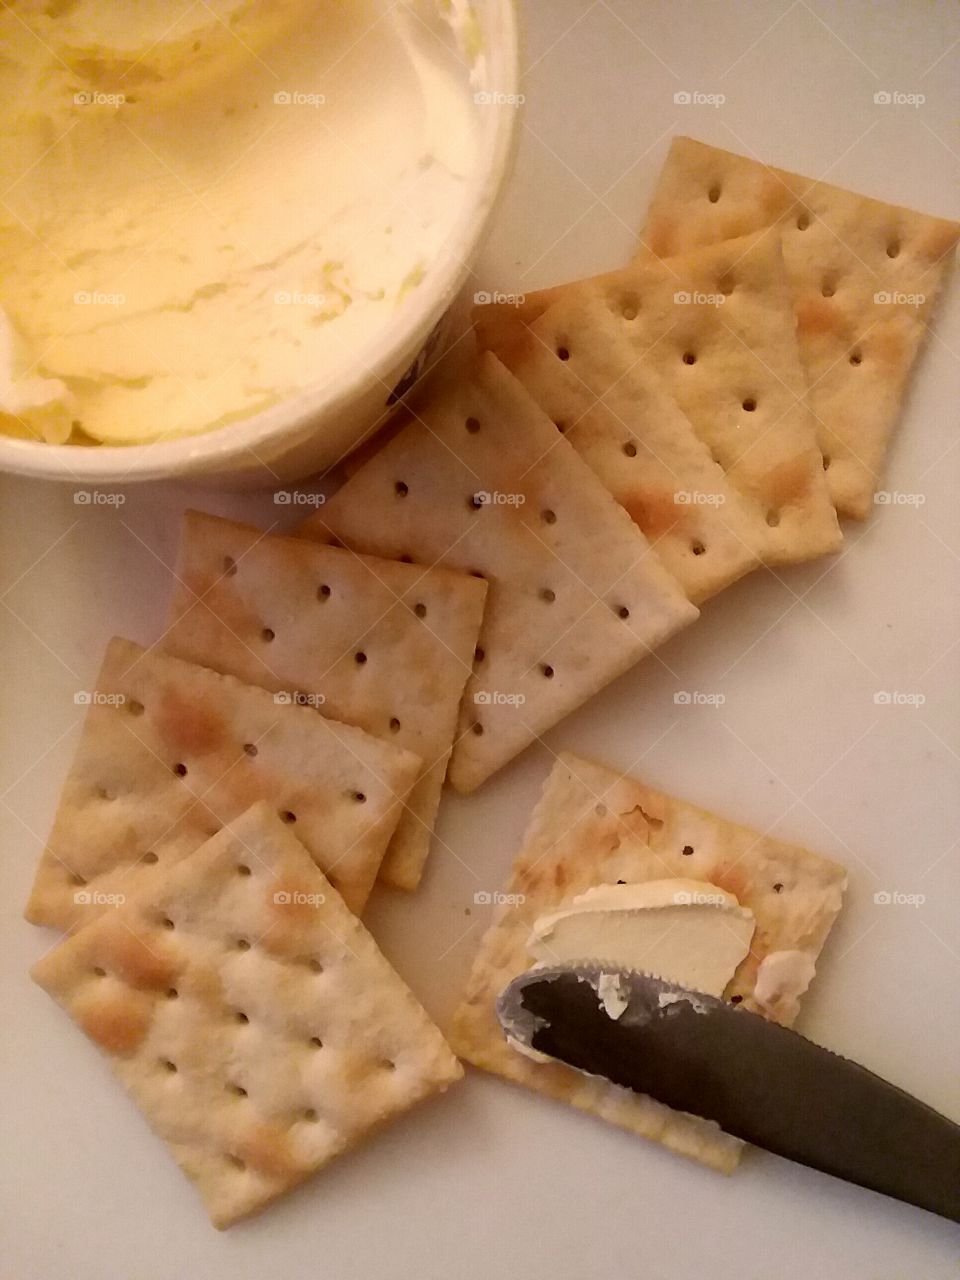 Crackers and butter